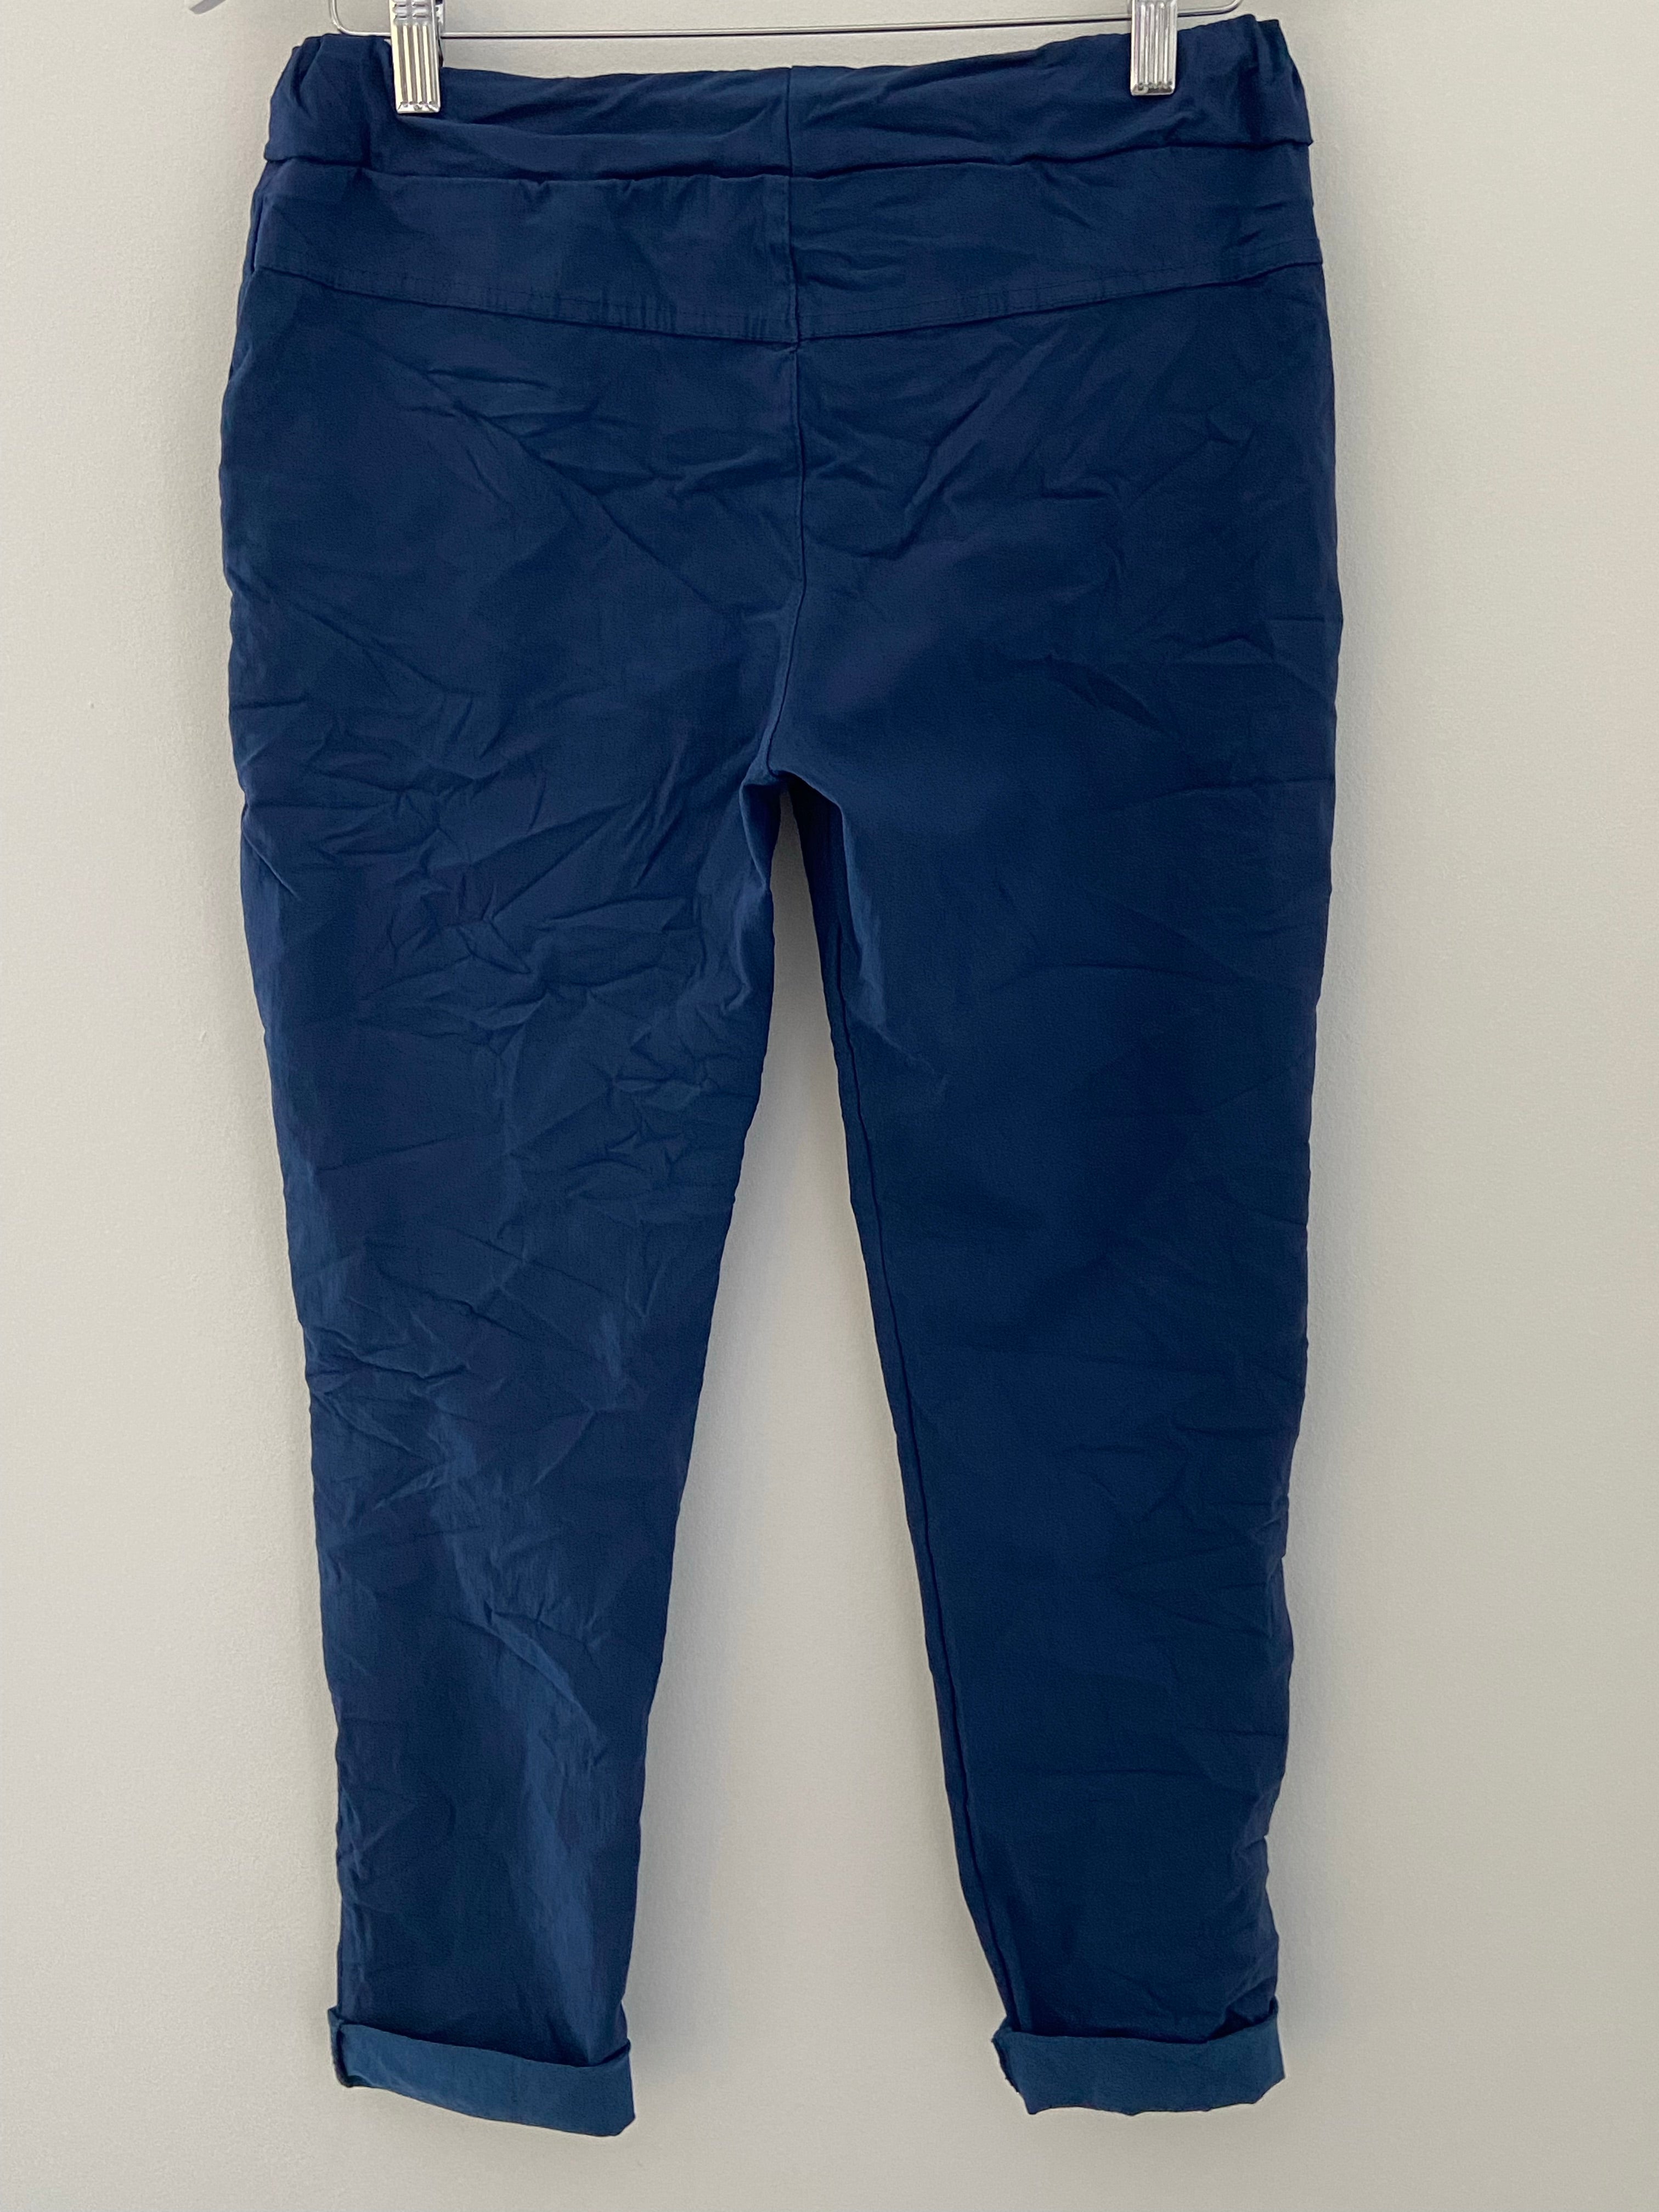 Slimfit Cotton Stretch Joggers in Navy